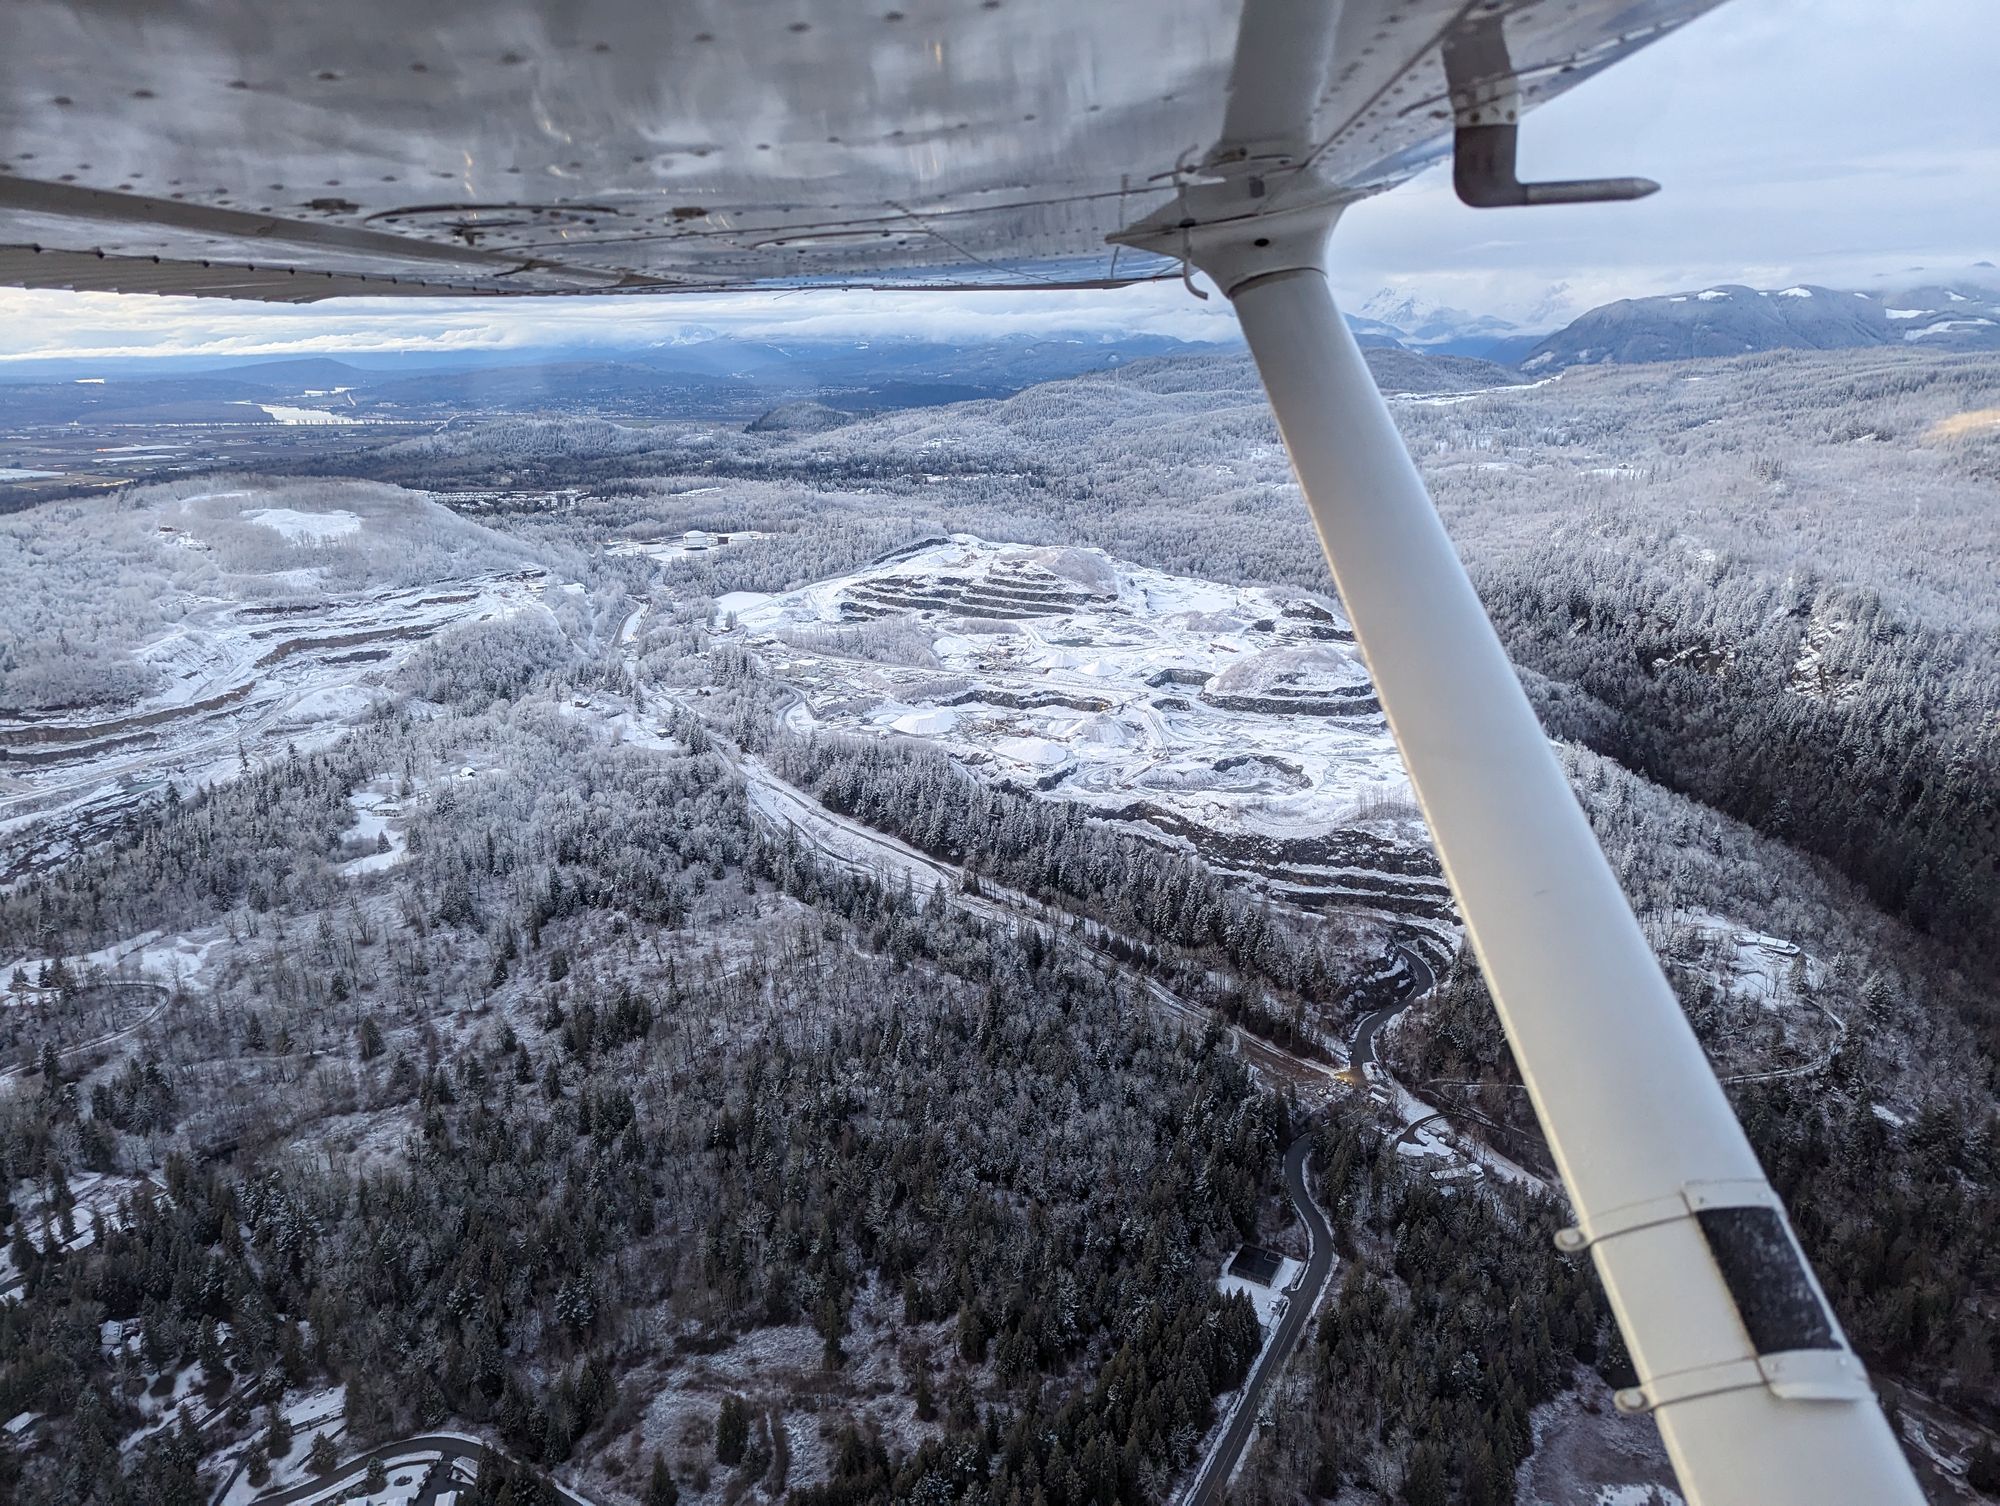 March 2nd, flying right after a light snowstorm, showcases the beauty of BC, Canada, where you experience all seasons. I completed my very first landing, and both my instructor and I were surprised that it went so well. It’s funny how in my following several landings, I was struggling to achieve the same level of smoothness and stability.